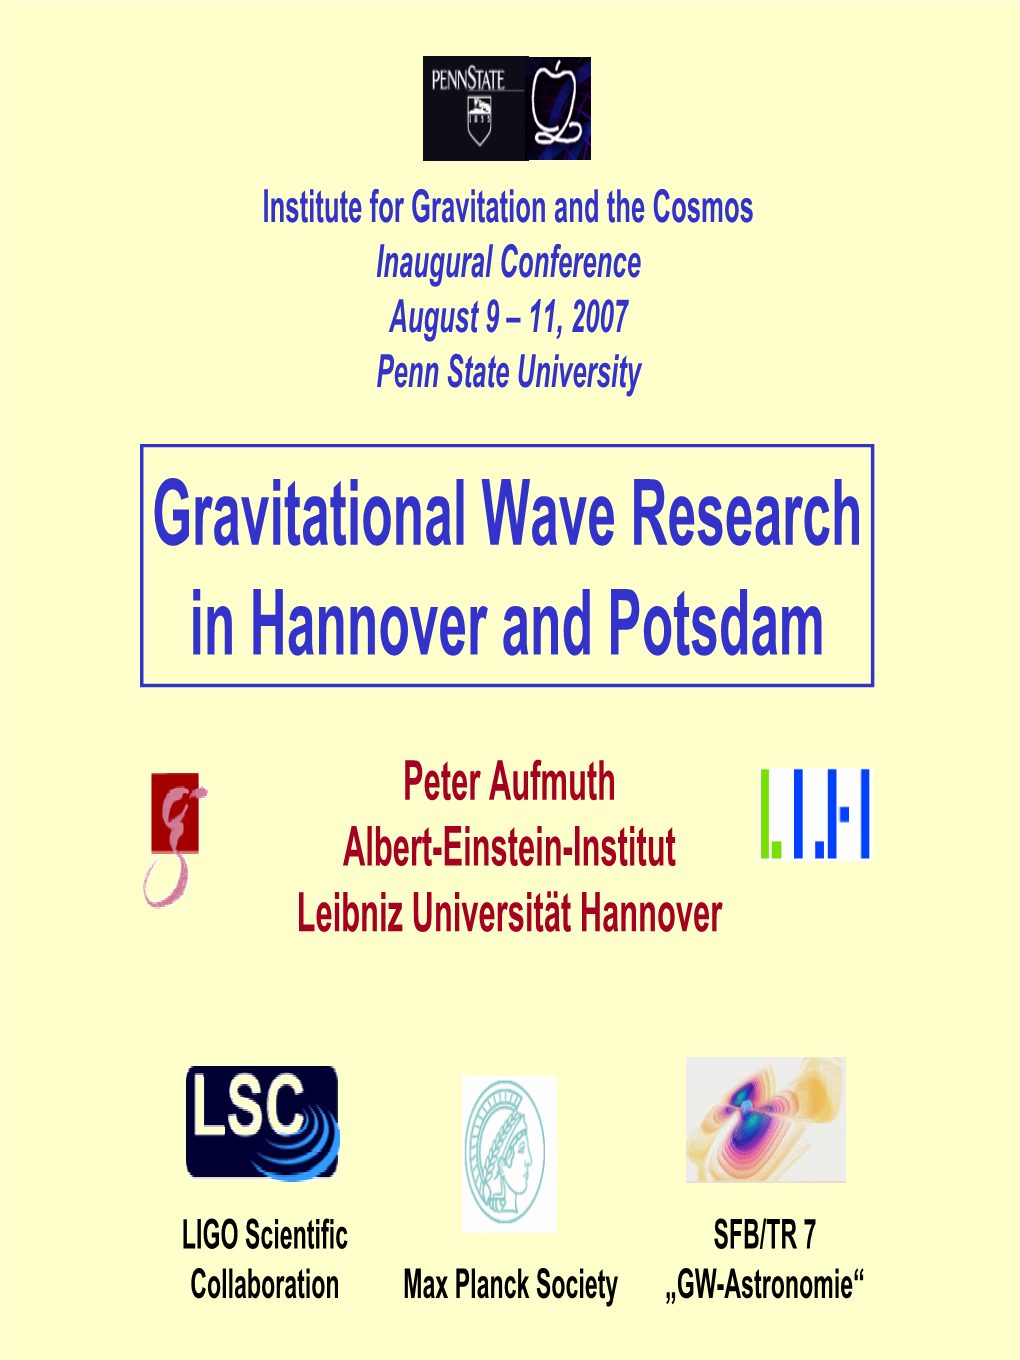 Gravitational Wave Research in Hannover and Potsdam